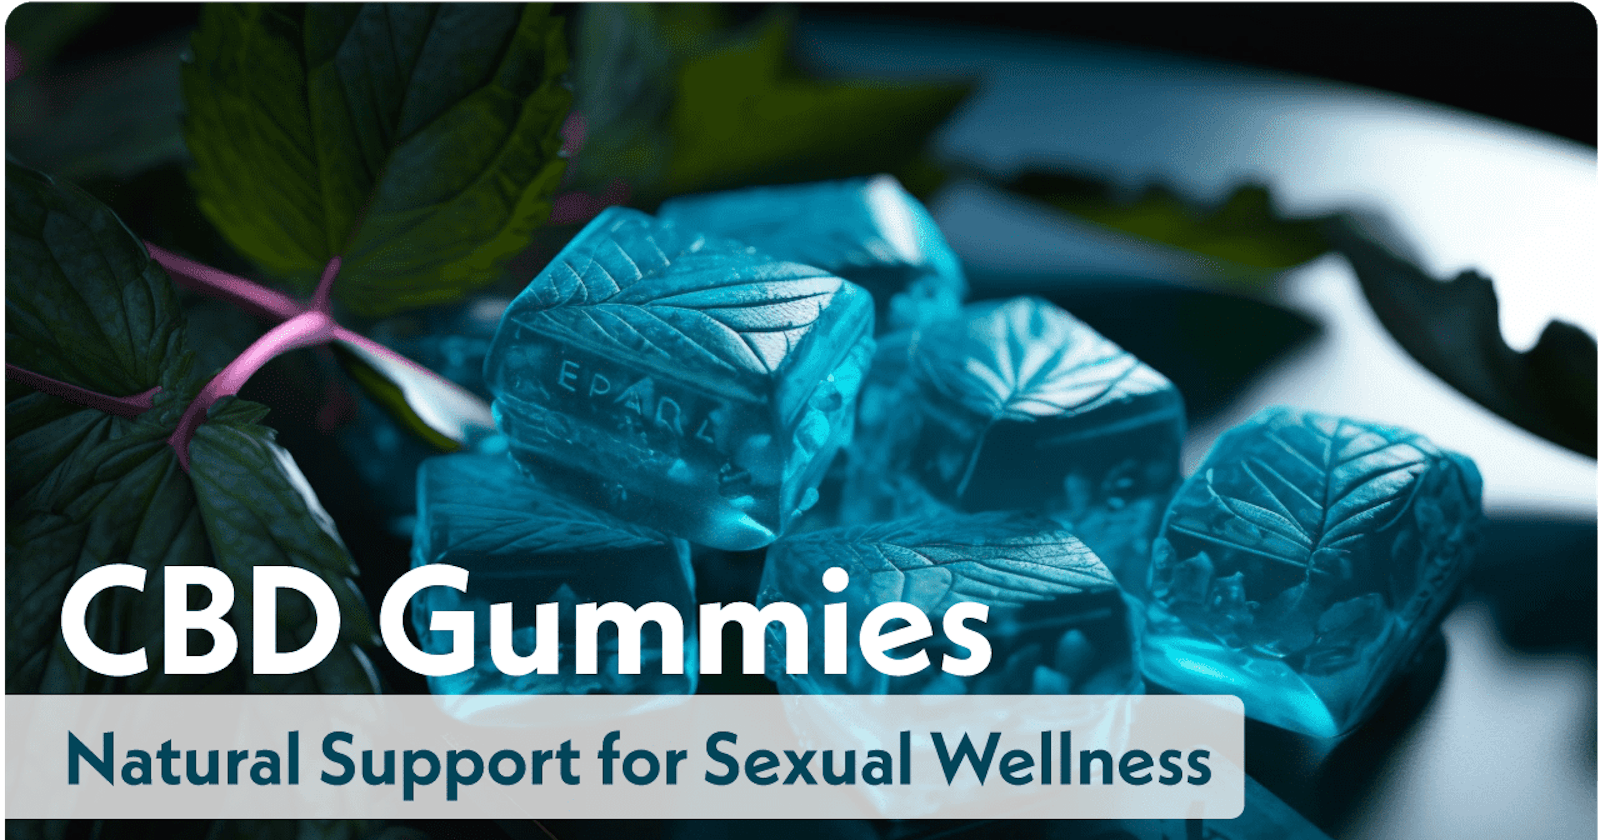 Choice CBD Gummies For ED - The All-Natural Solution for Men's Sexual Health